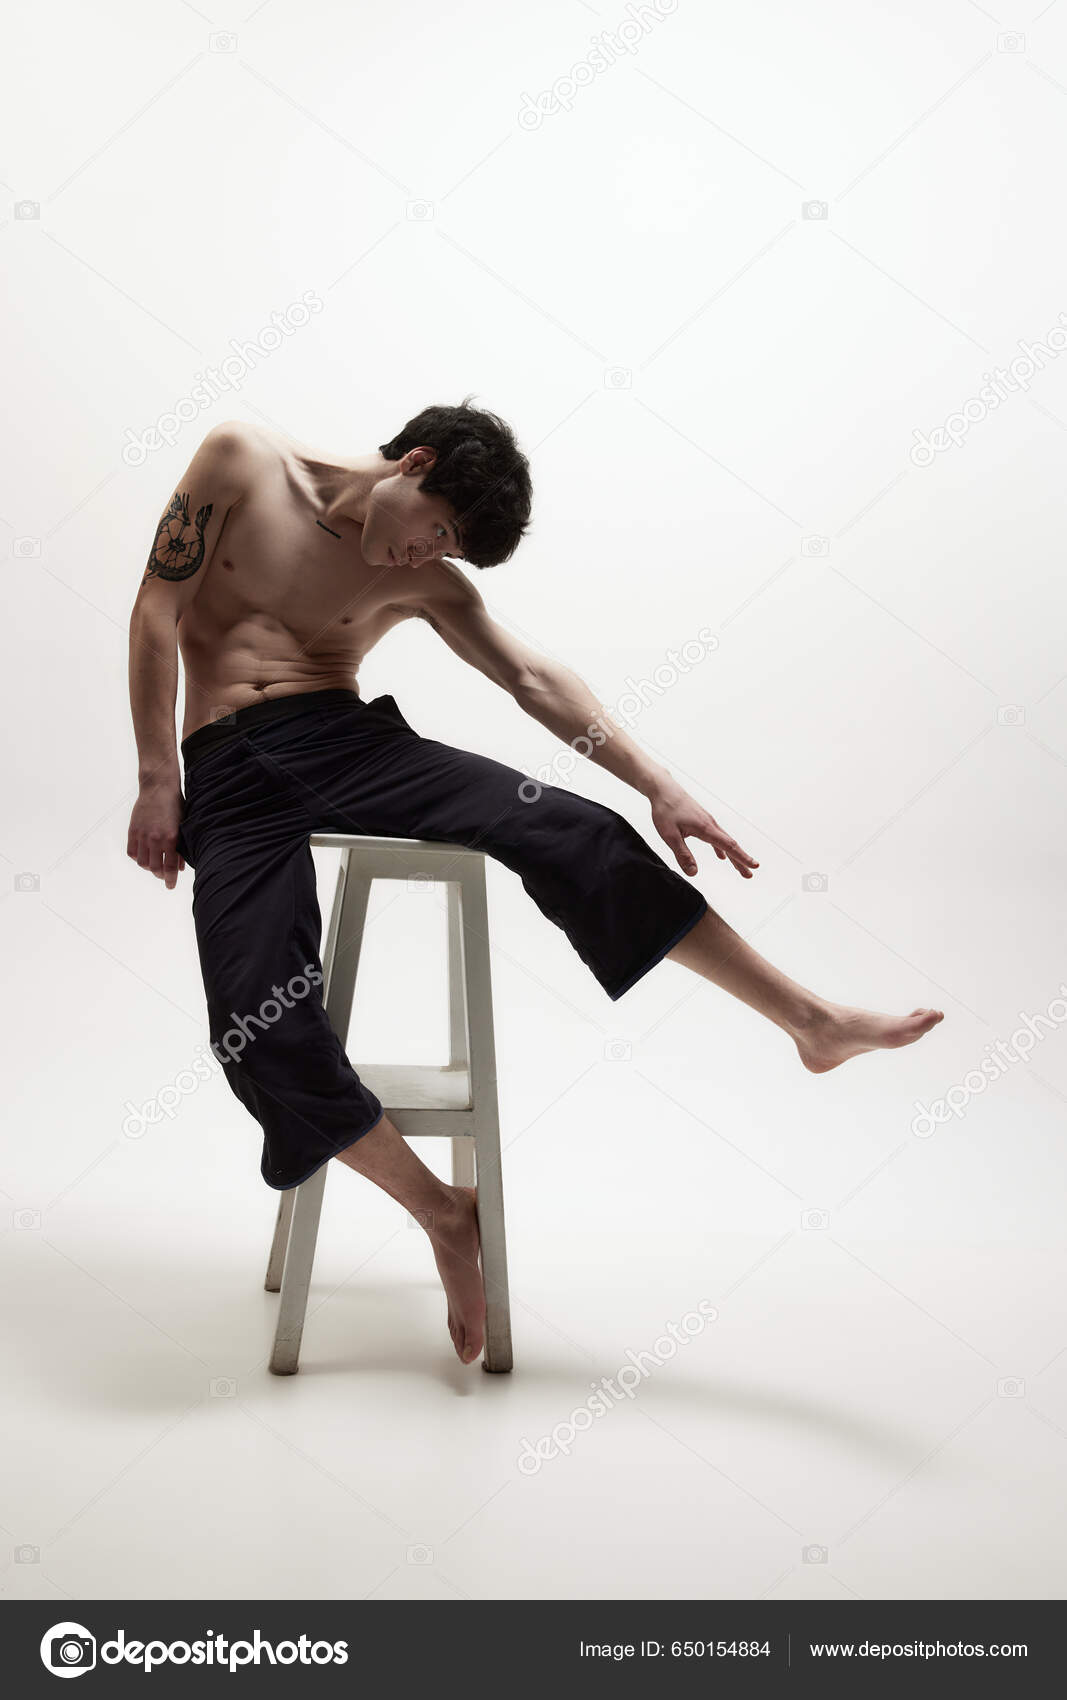 Best Male Poses – Guide to Photographing Men | Skylum Blog